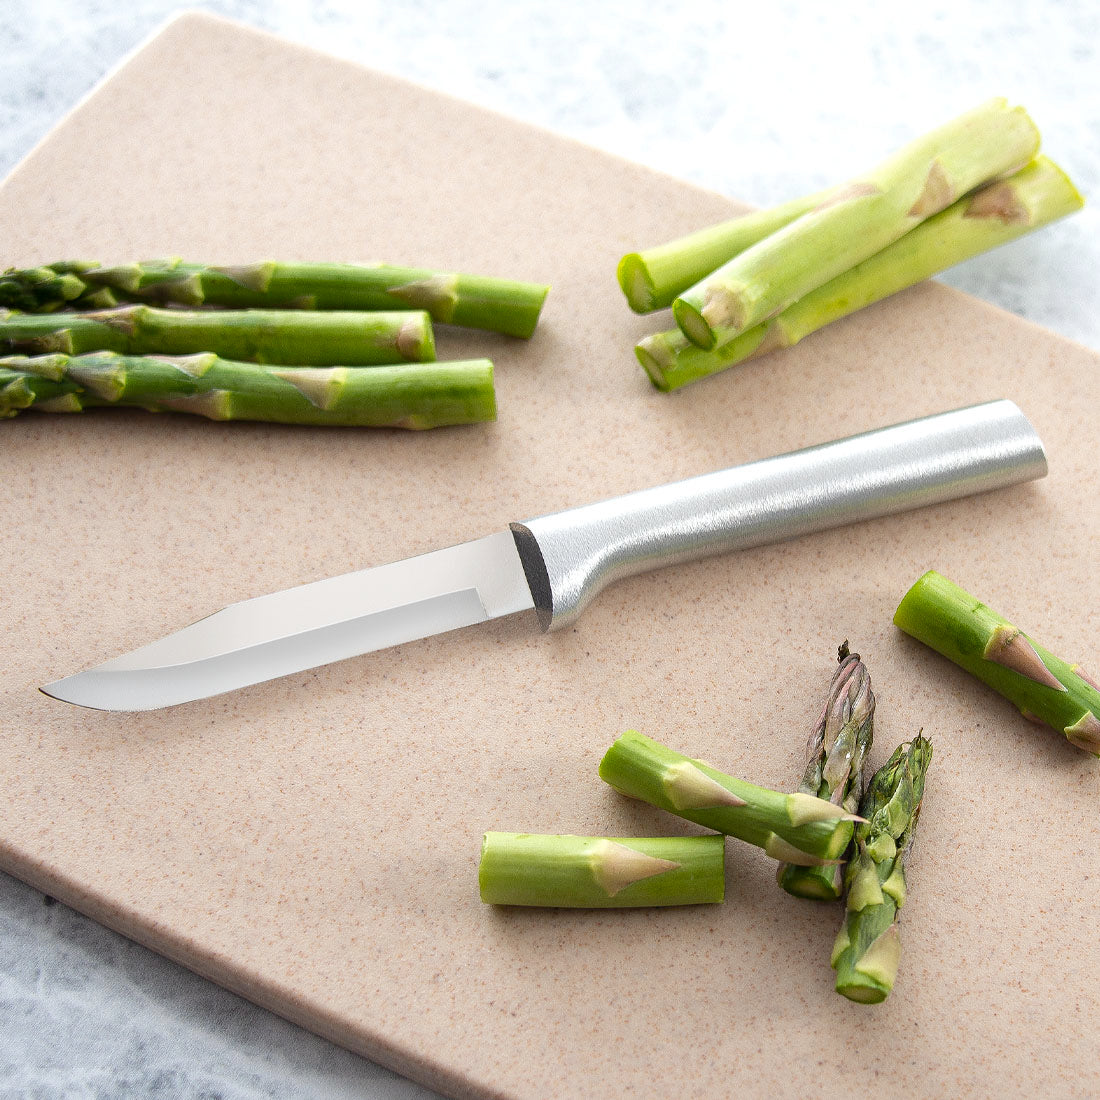 Silver handled Regular Paring knife next to sliced asparagus on a tan cutting board